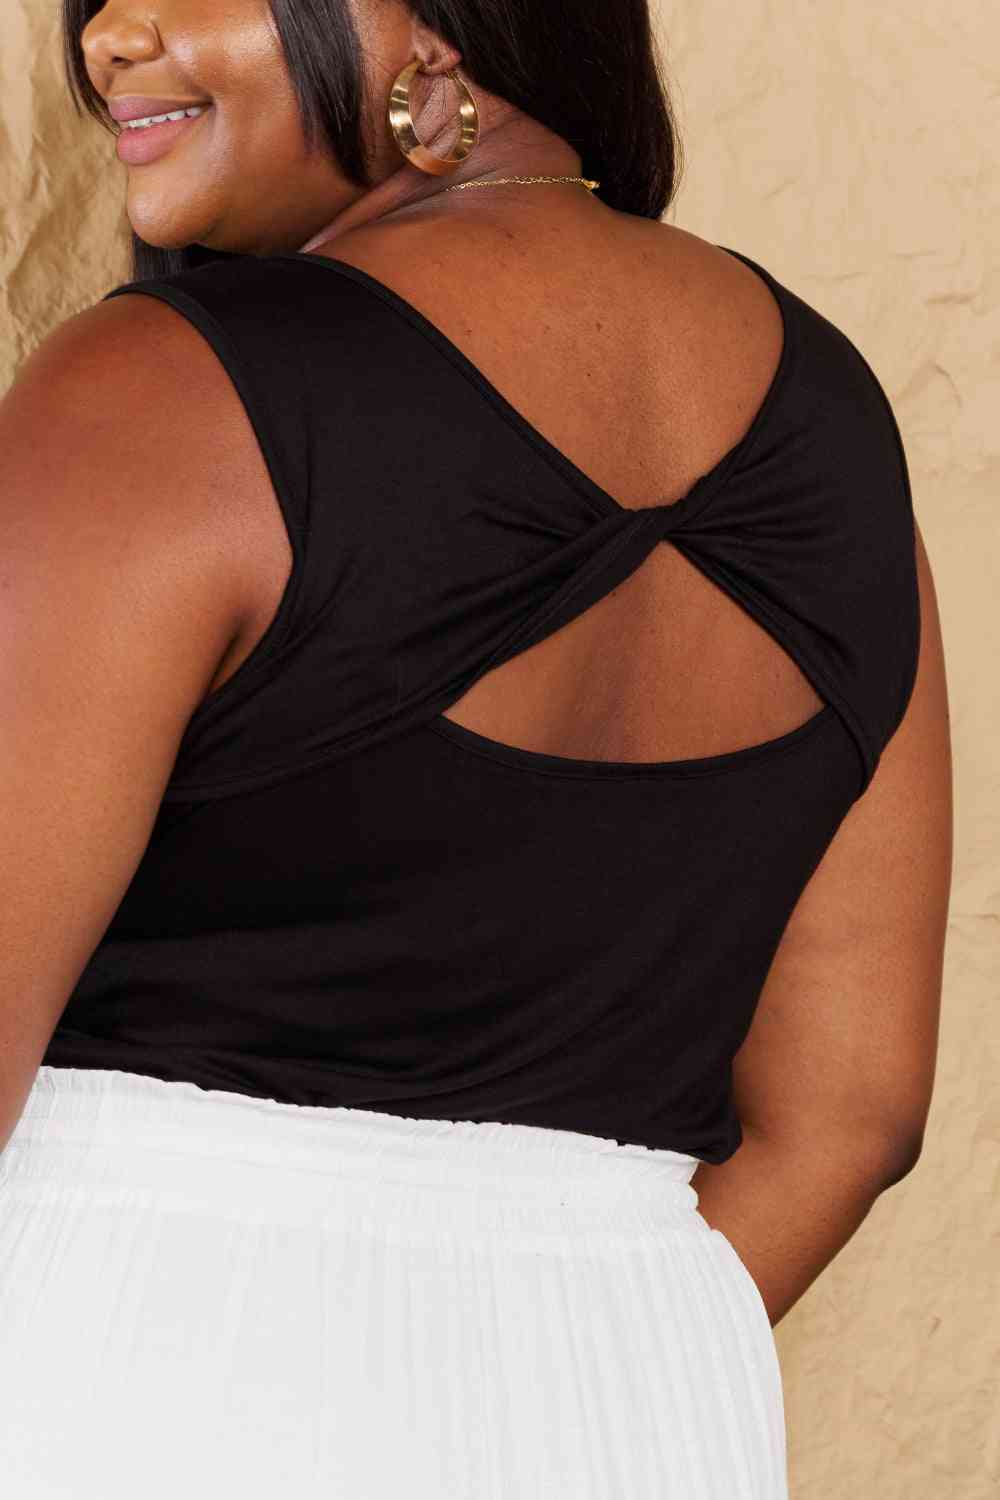 Heimish Say The Least Full Size Sleeveless Criss Cross Back Detail Top